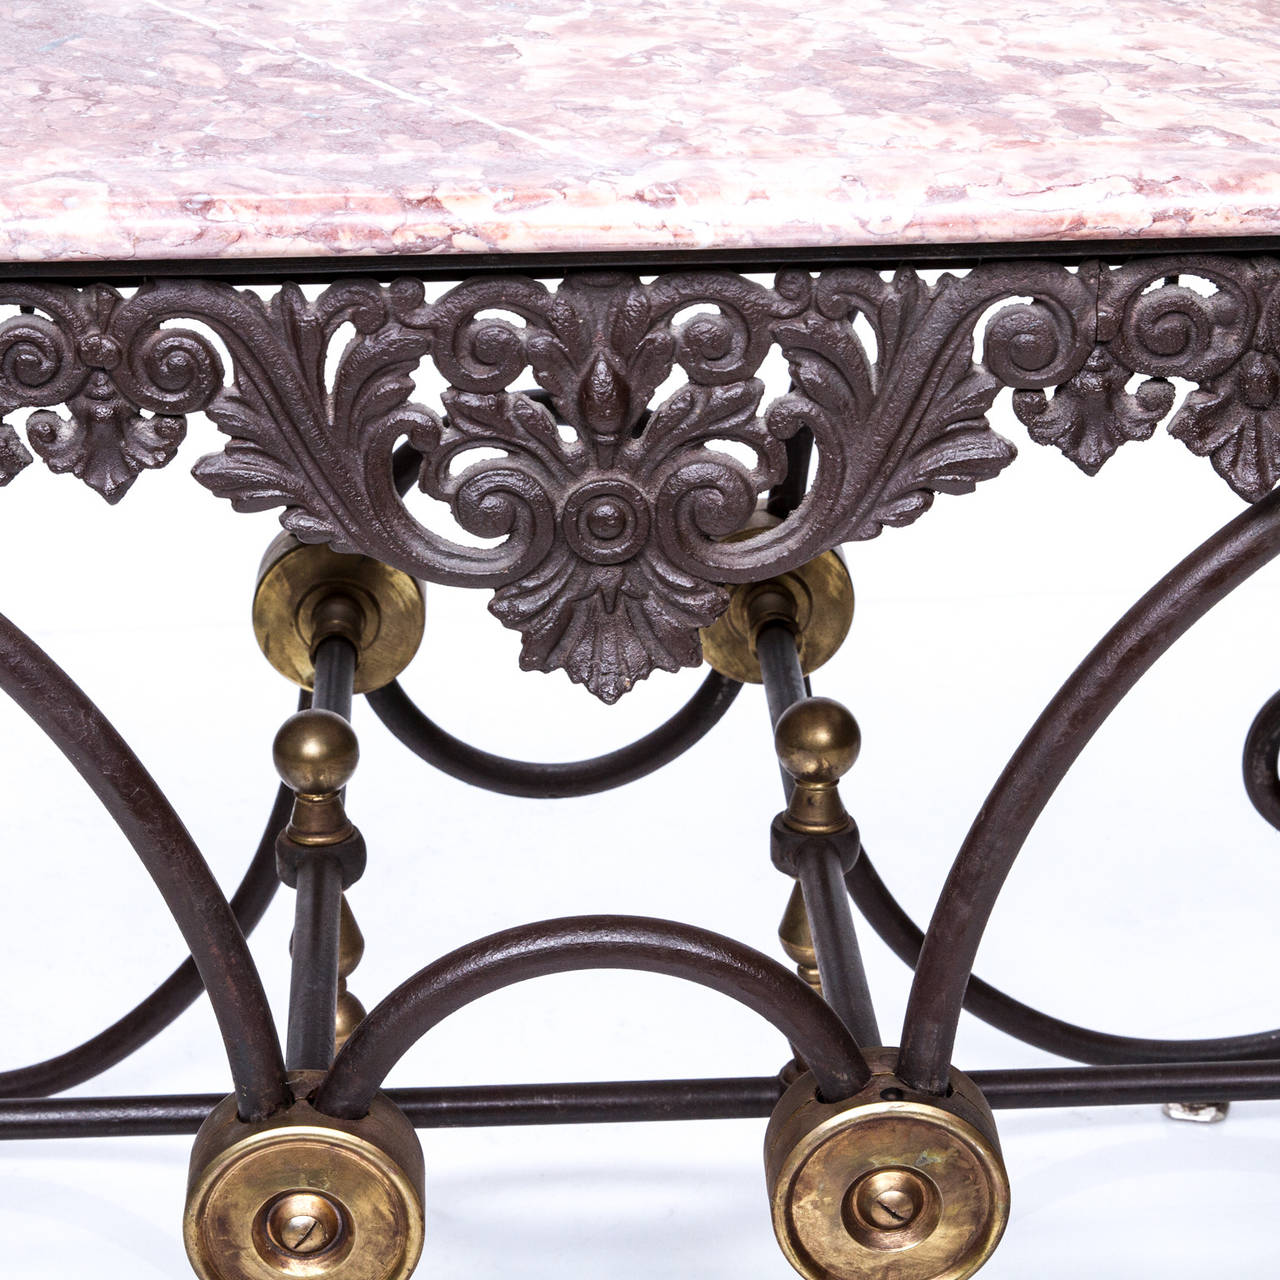 French iron and marble pastry table.

A fine and quality iron base and marble-top French pastry table with decorative apron and scrolled base. Notice the brass round cover plates and finials. Just a sign of the quality of this table, circa 1920s.